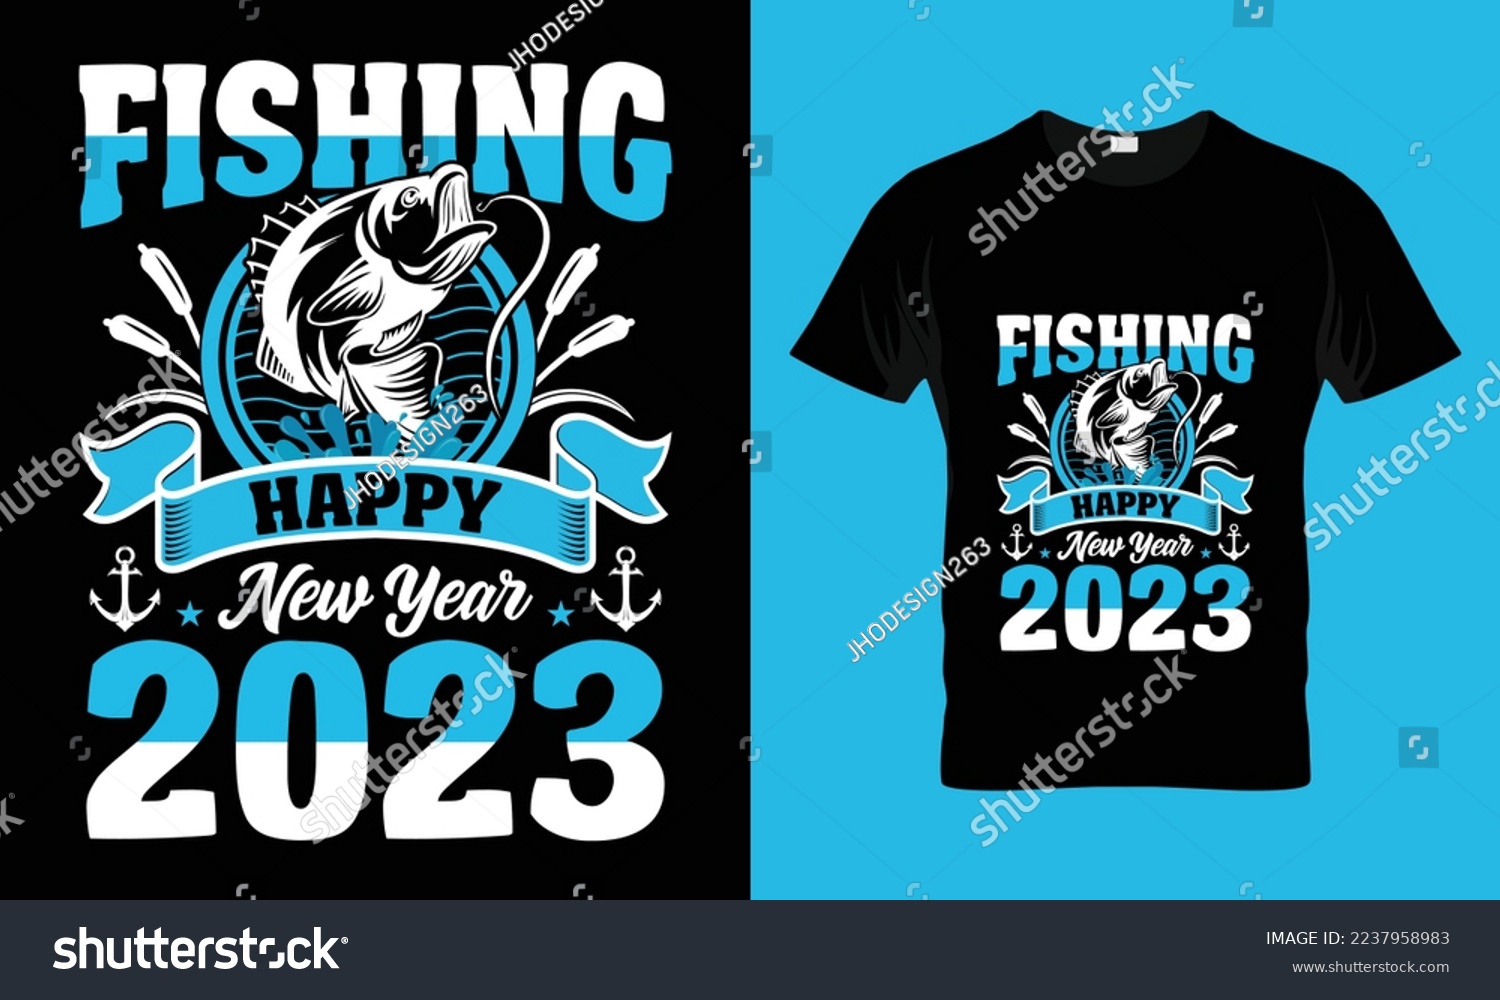 SVG of Fishing happy new year 2023 design template vector and typography.
Ready for t-shirt, mug,gift and other printing,2023 svg design,New Year Stickers quotes t shirt designs
Happy new year svg.
 svg